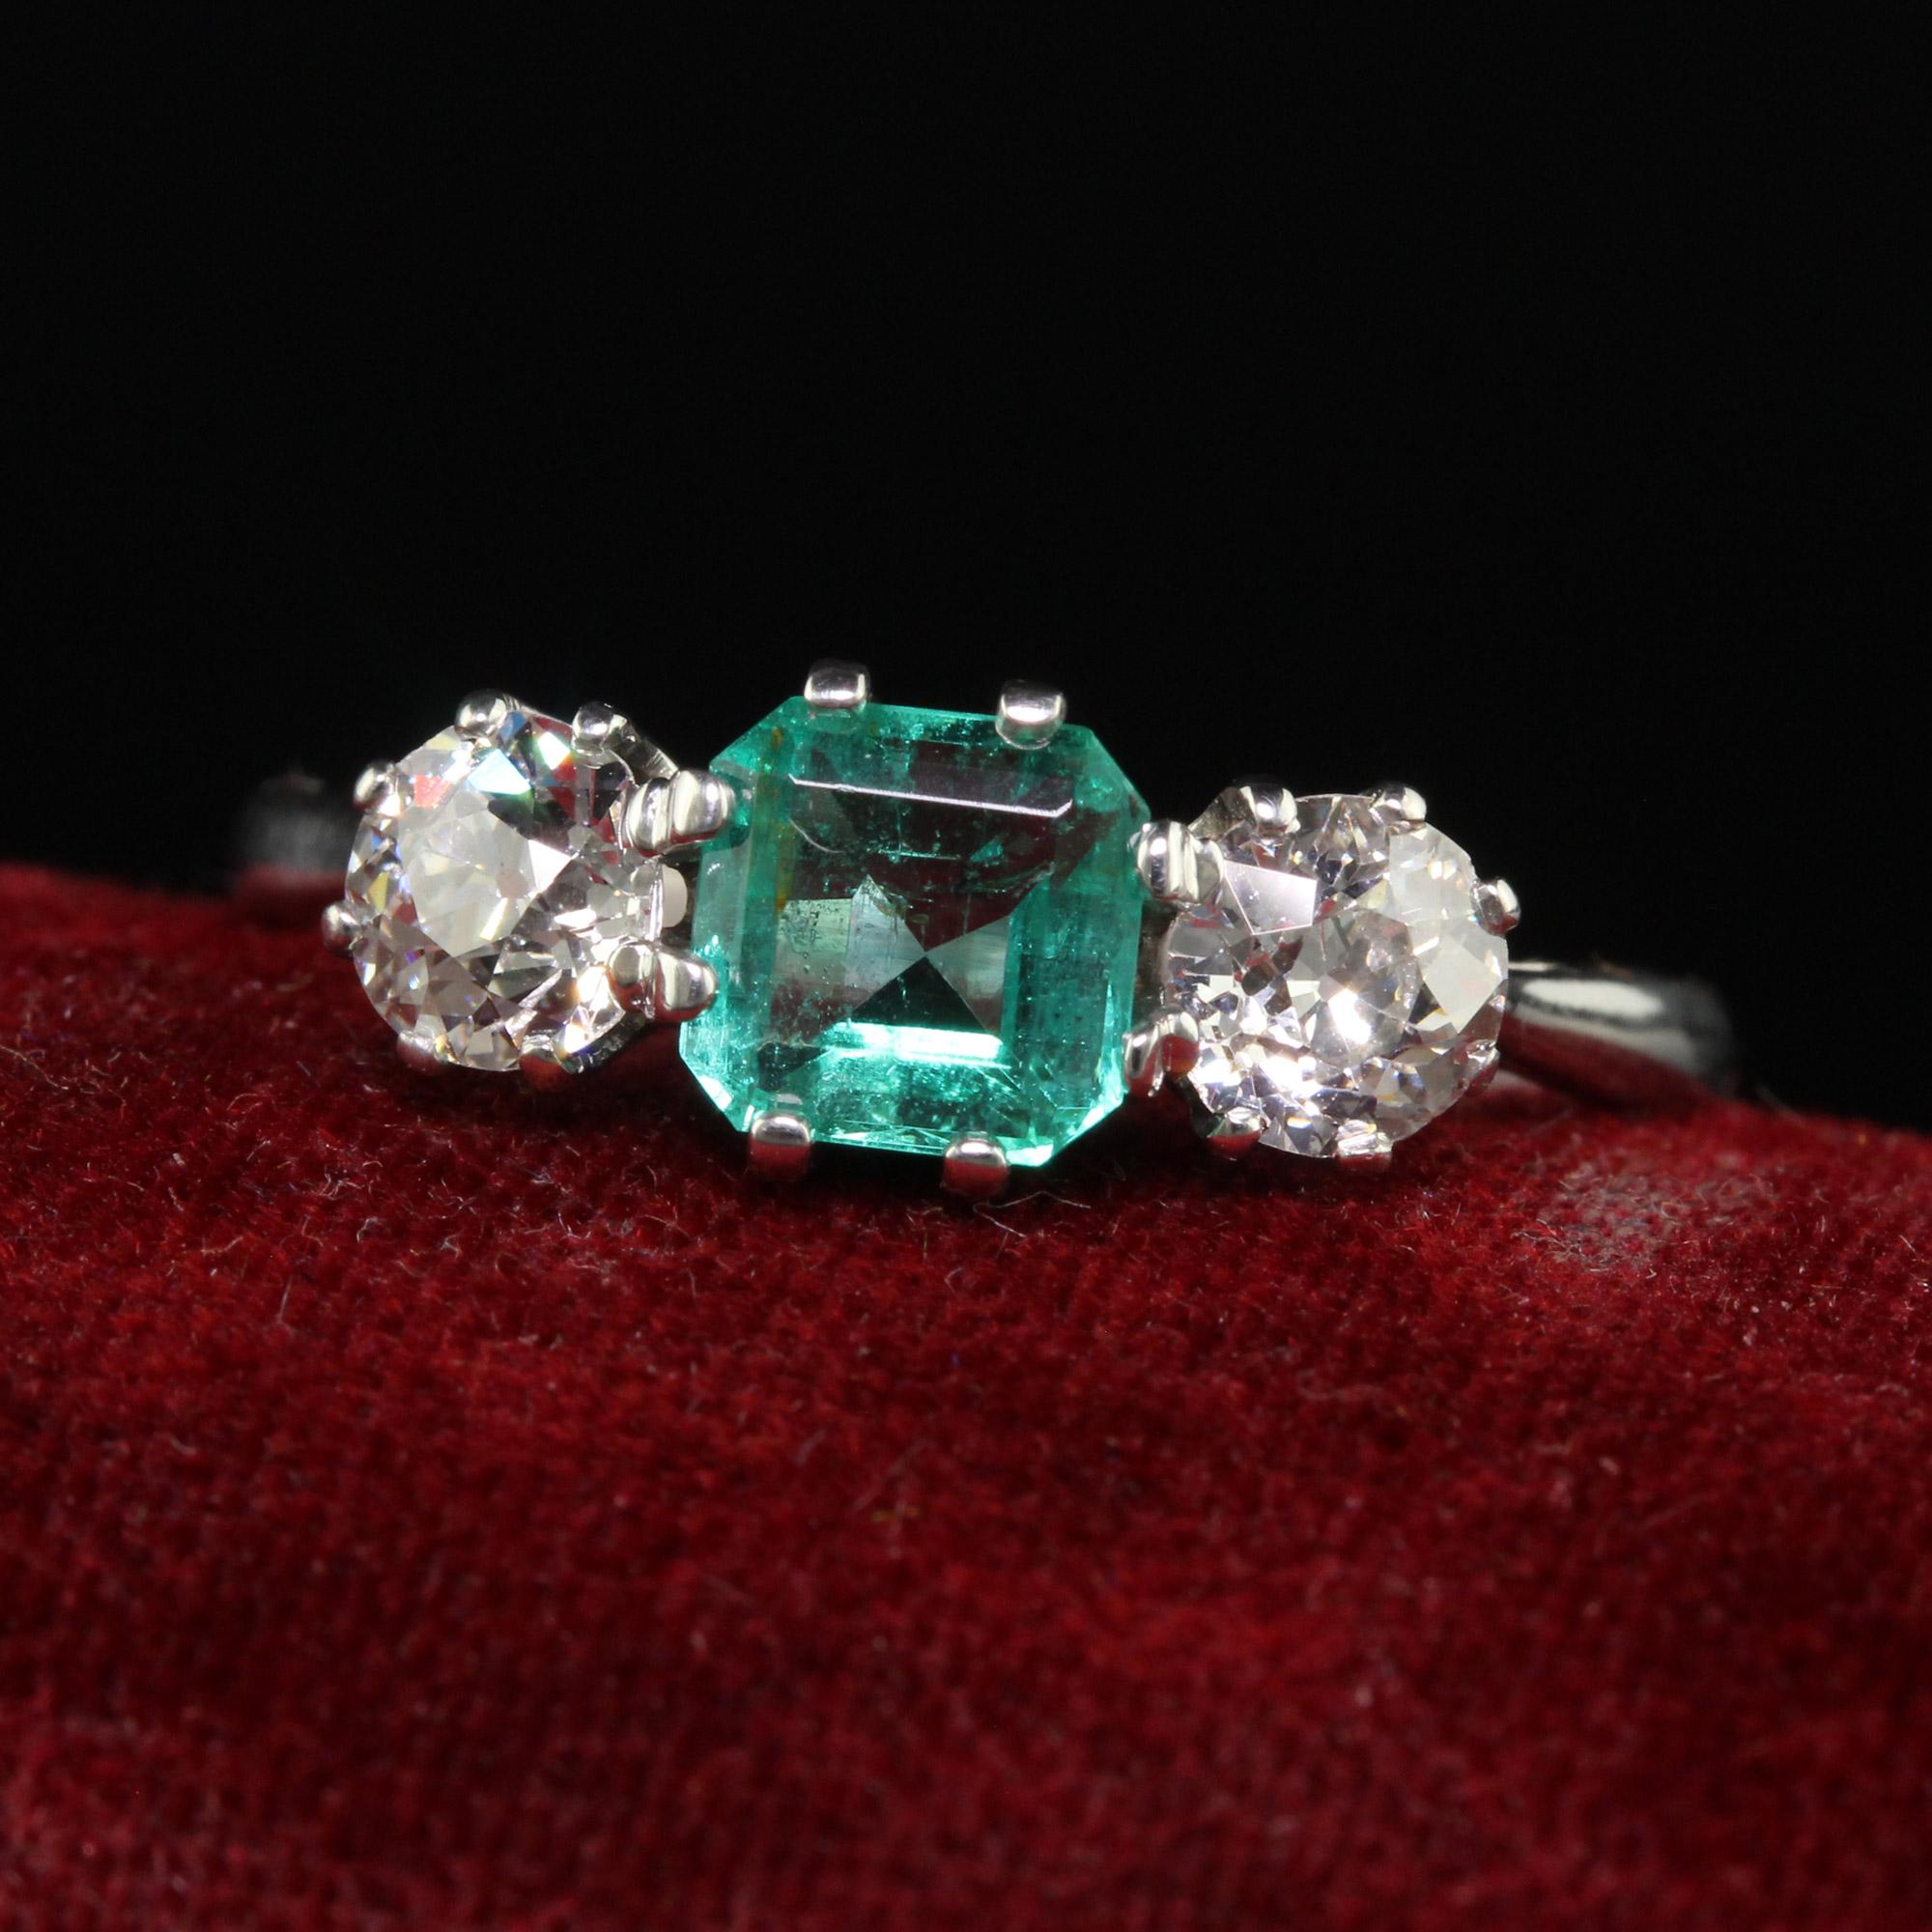 Beautiful Antique Art Deco Platinum Old Euro Diamond and Emerald Three Stone Ring. This beautiful classic art deco three stone ring is crafted in platinum. This gorgeous art deco ring holds a natural green emerald in the center with two old European